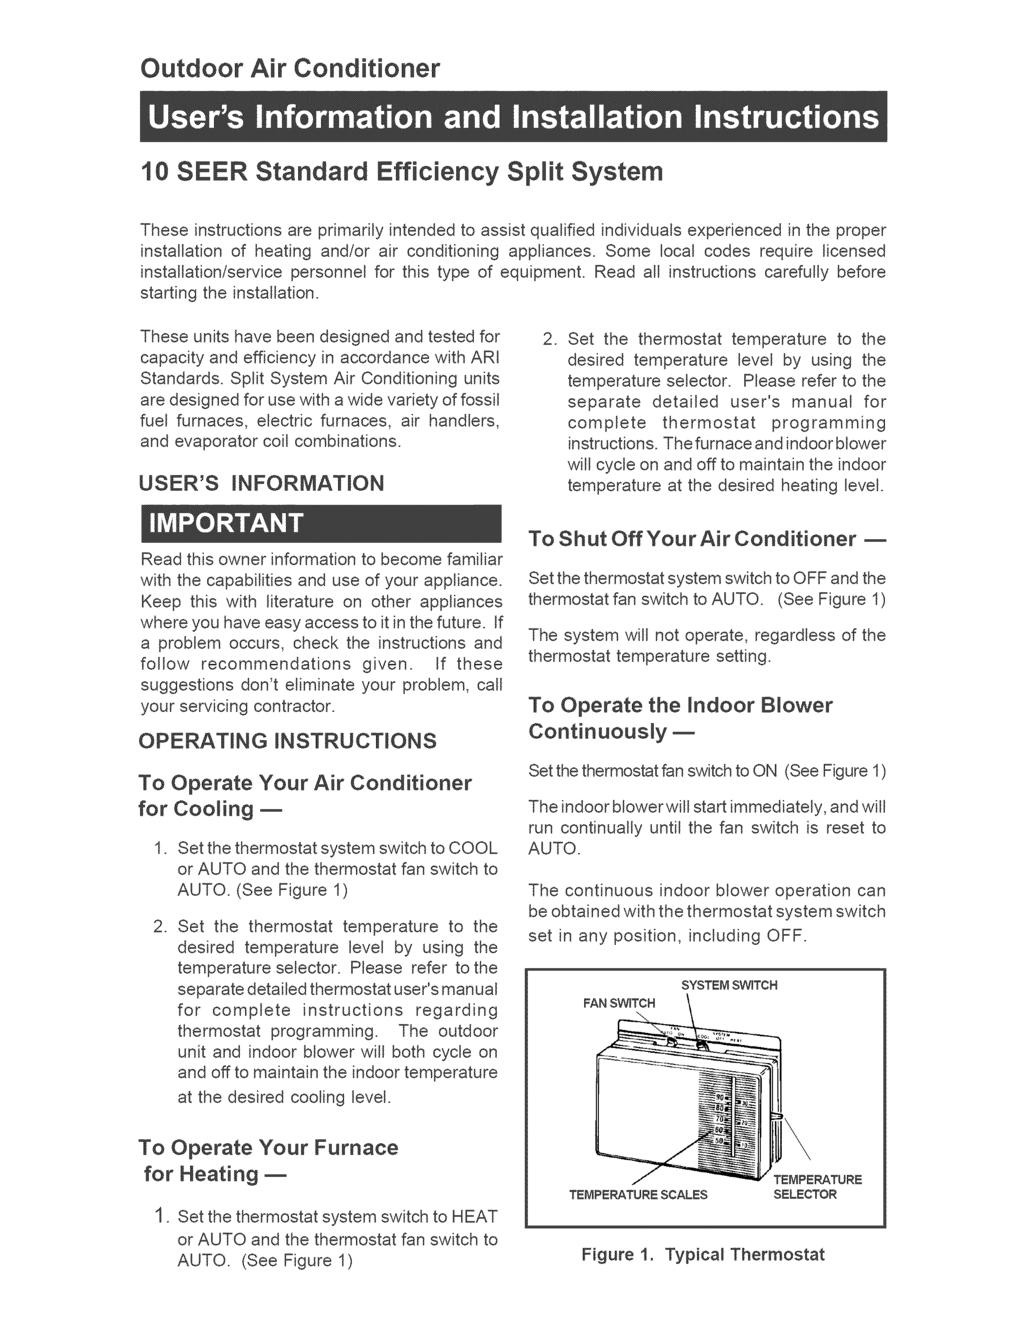 Outdoor Air Conditioner 10 SEER Standard Efficiency Split System These instructions are primarily intended to assist qualified individuals experienced in the proper installation of heating and/or air